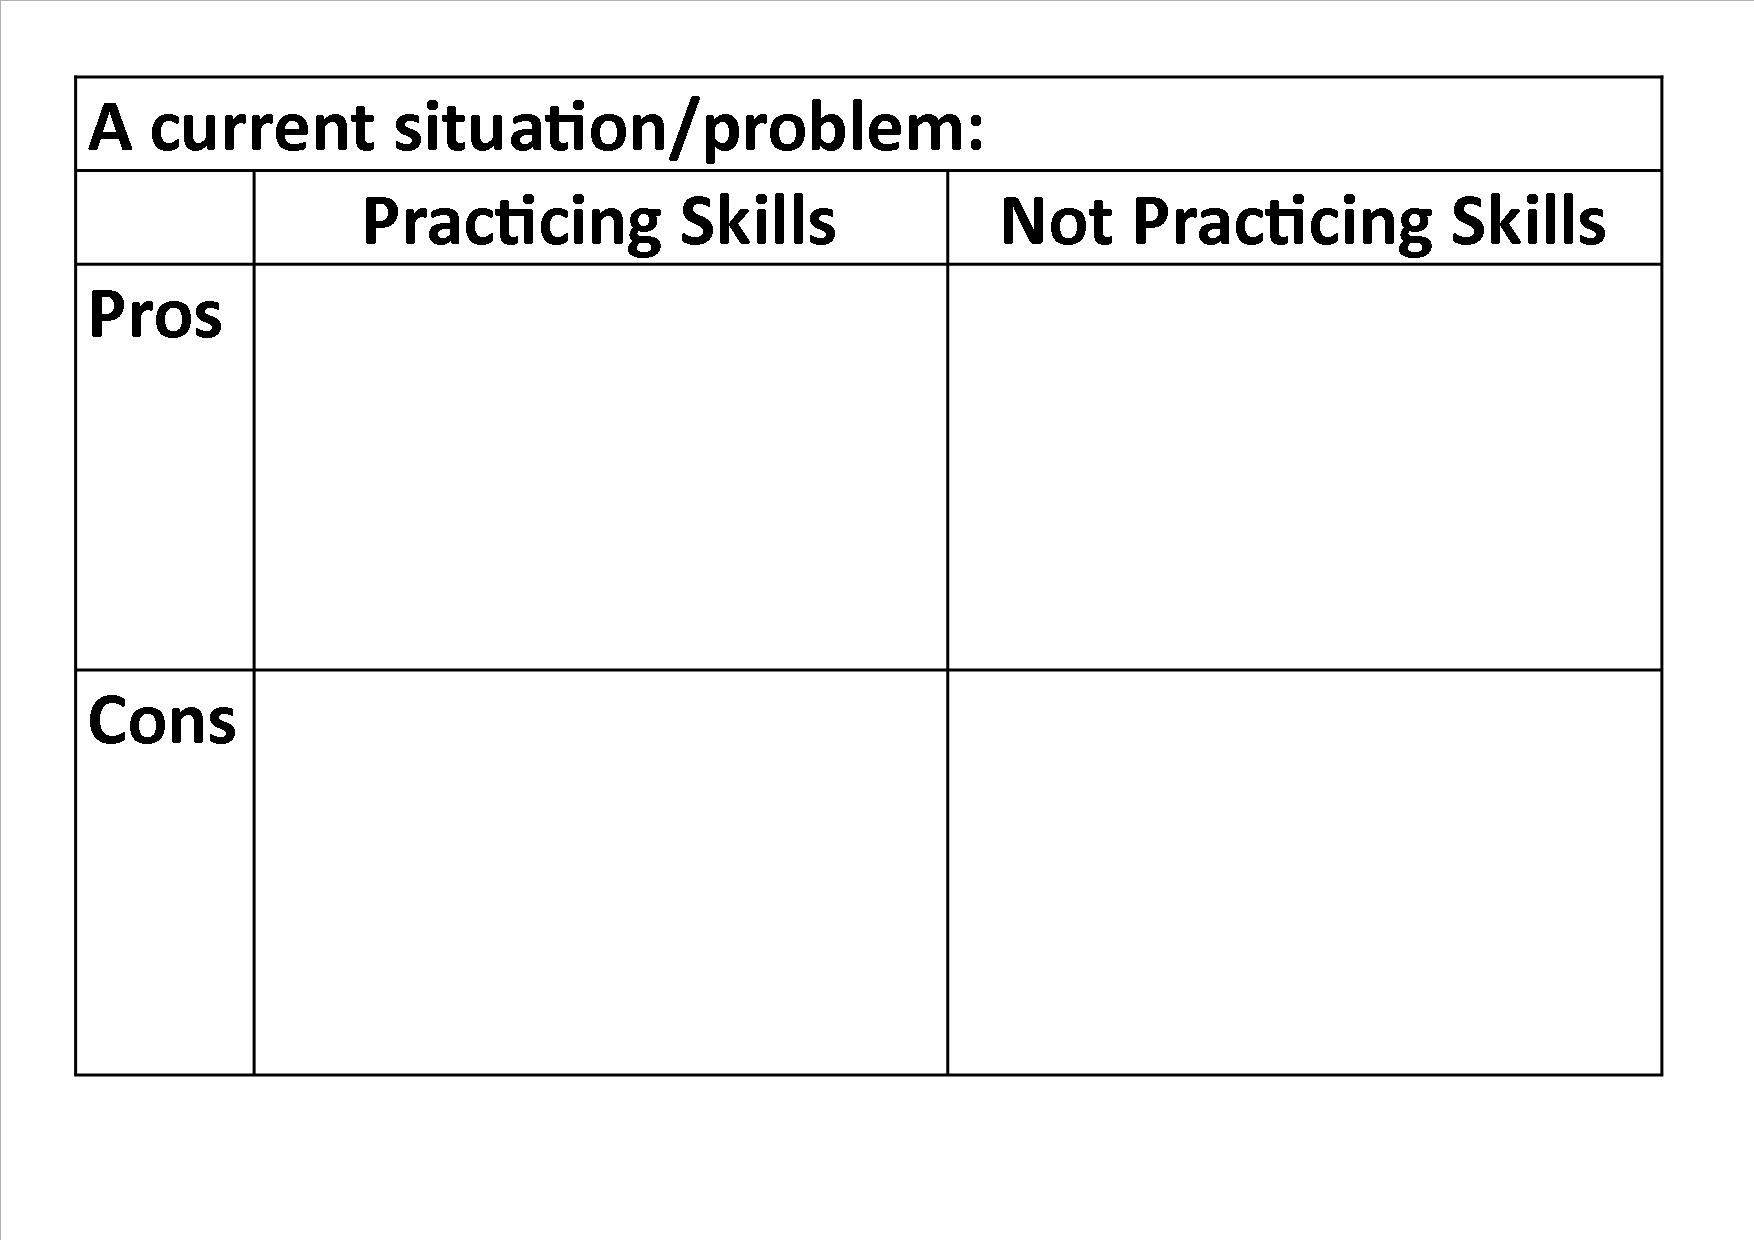 blank pros and cons table.jpg